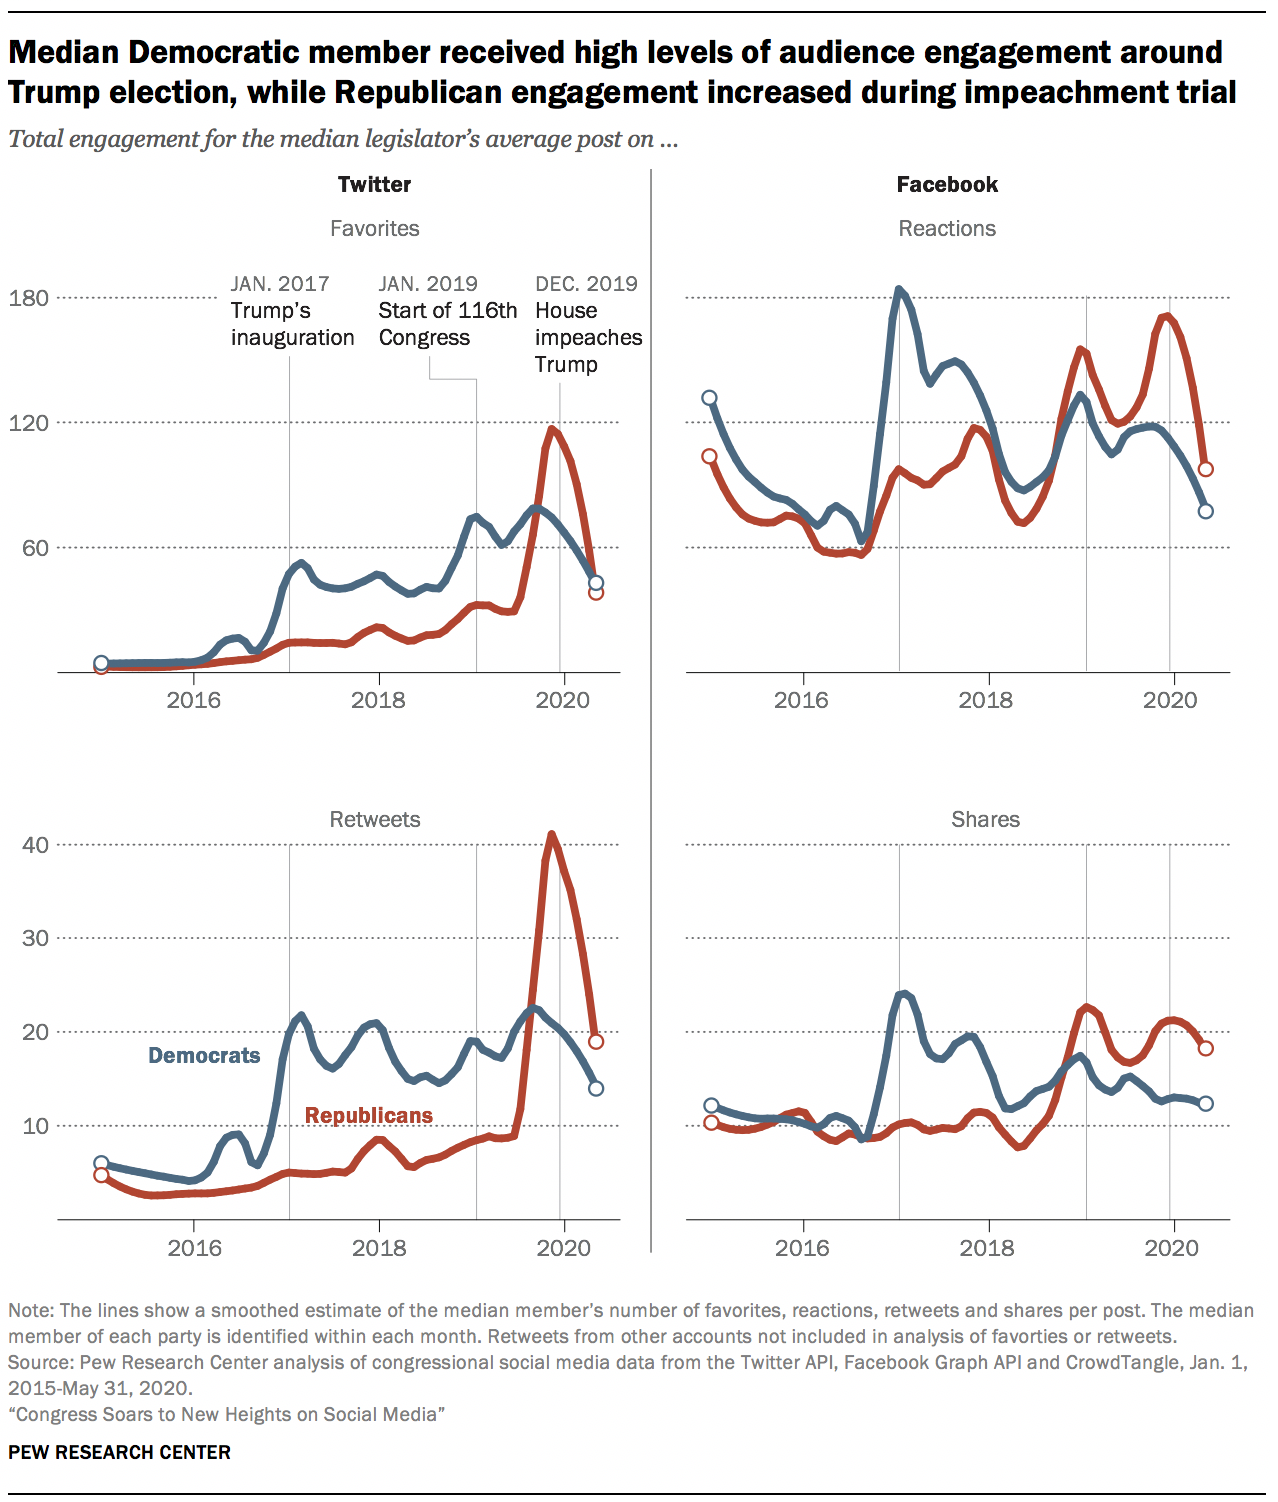 Median Democratic member received high levels of audience engagement around Trump election, while Republican engagement increased during impeachment trial